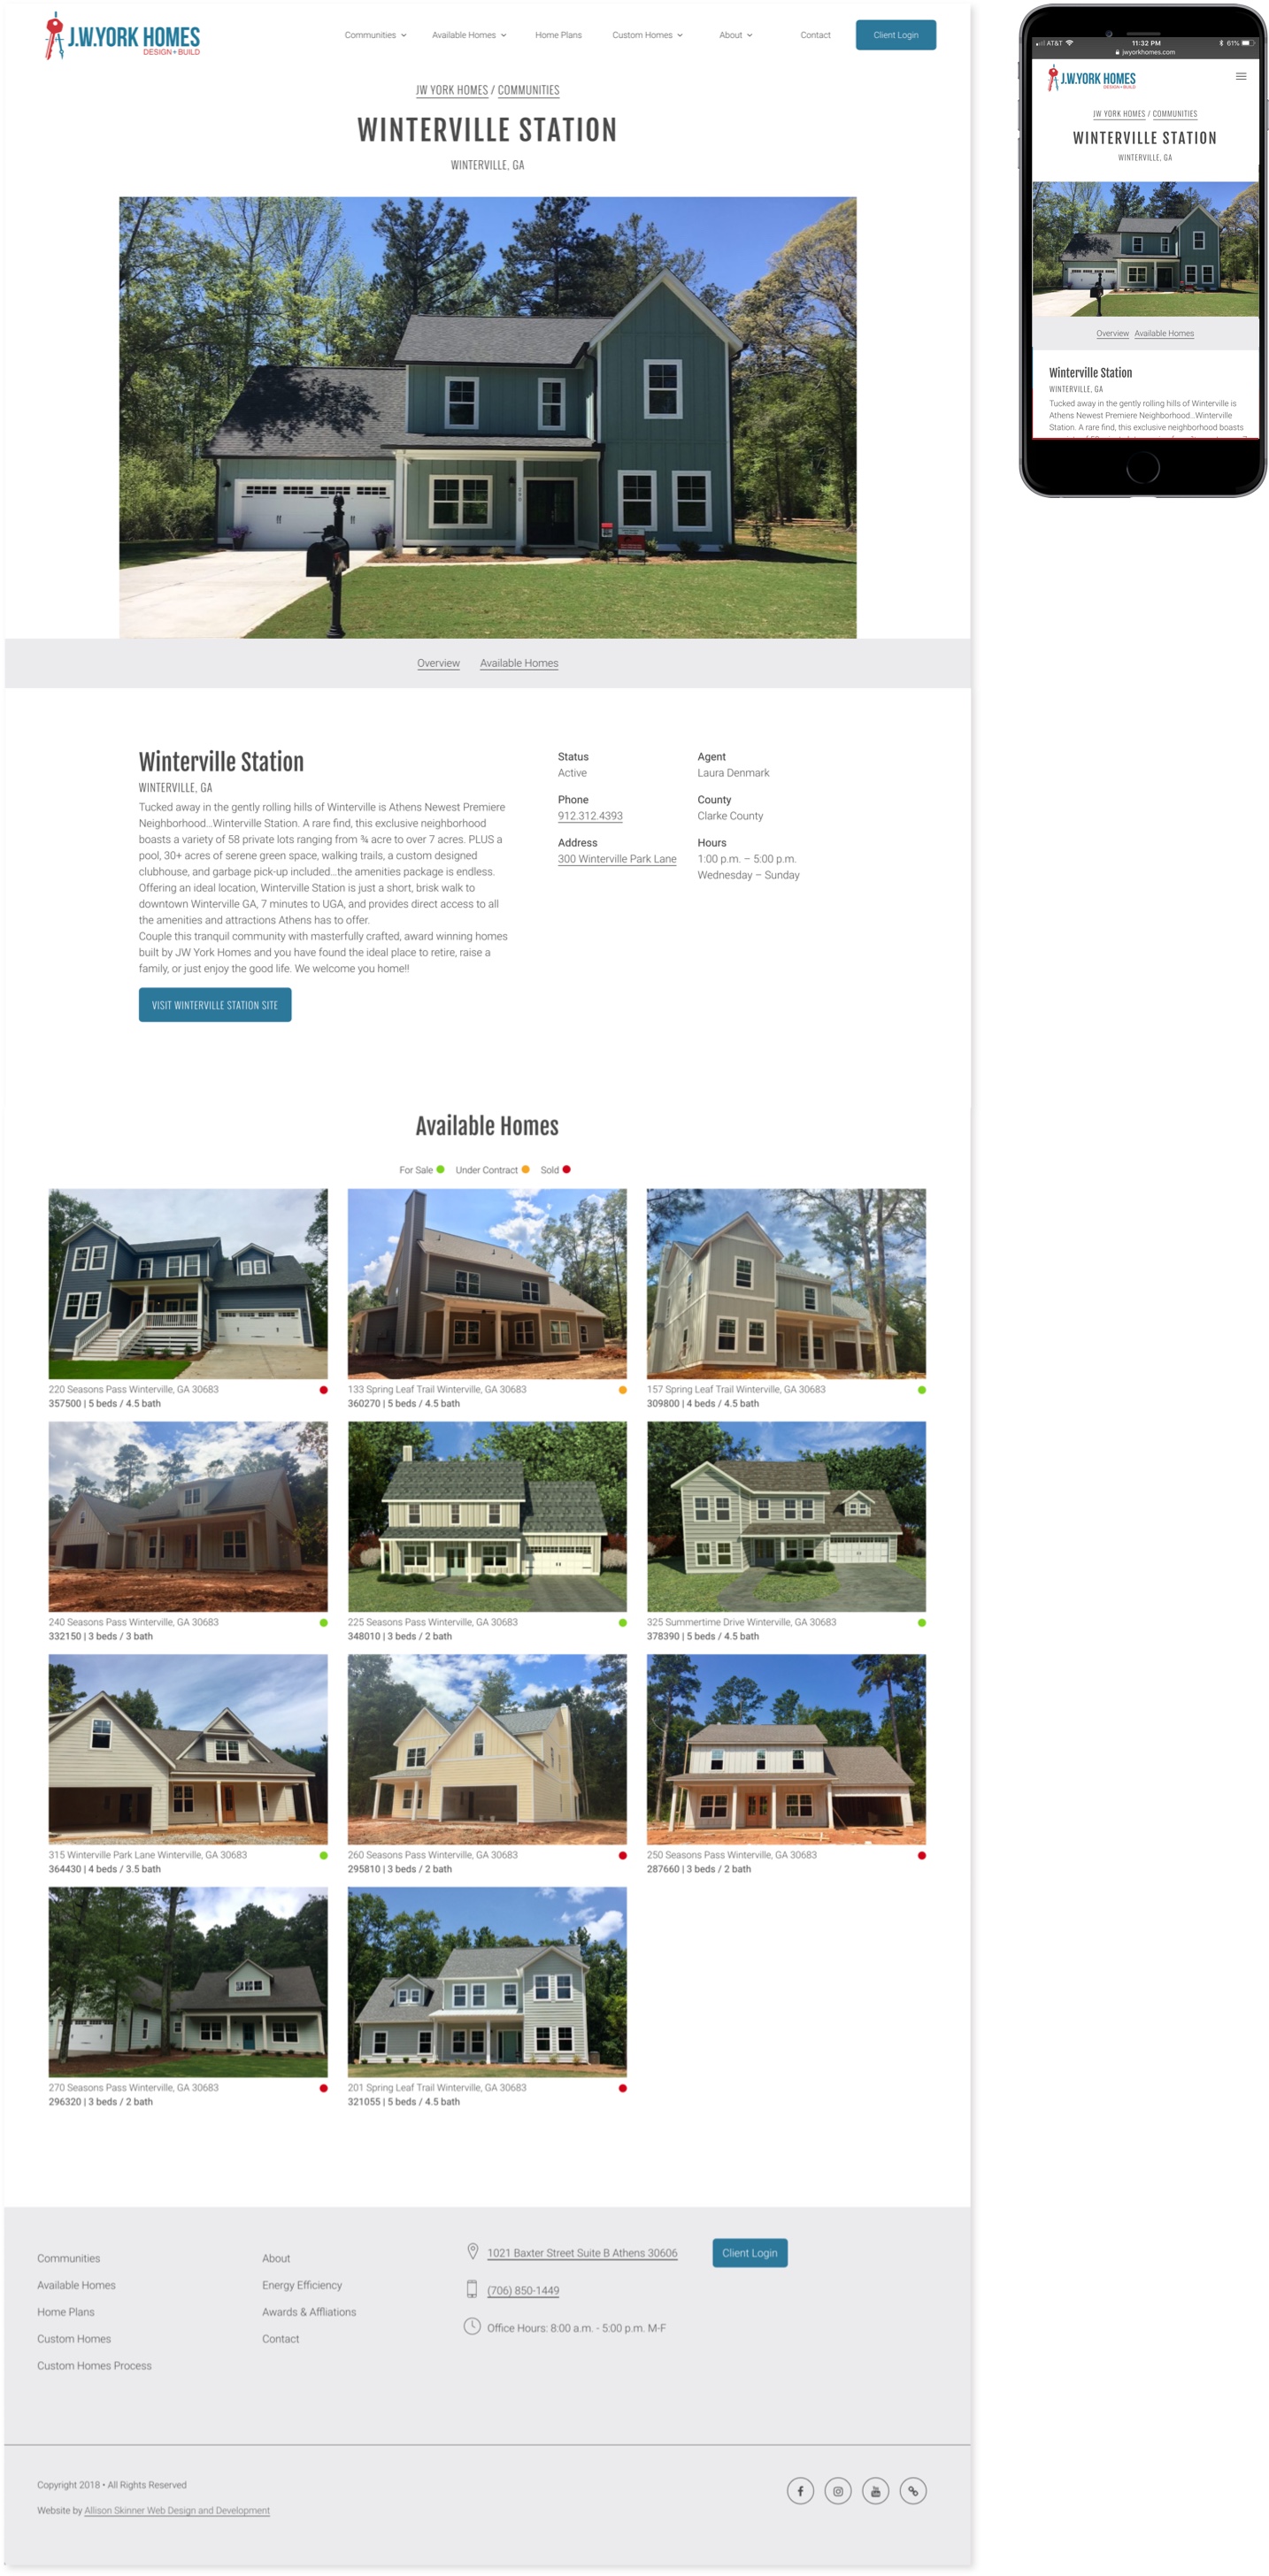 Winterville Station community at multiple viewports